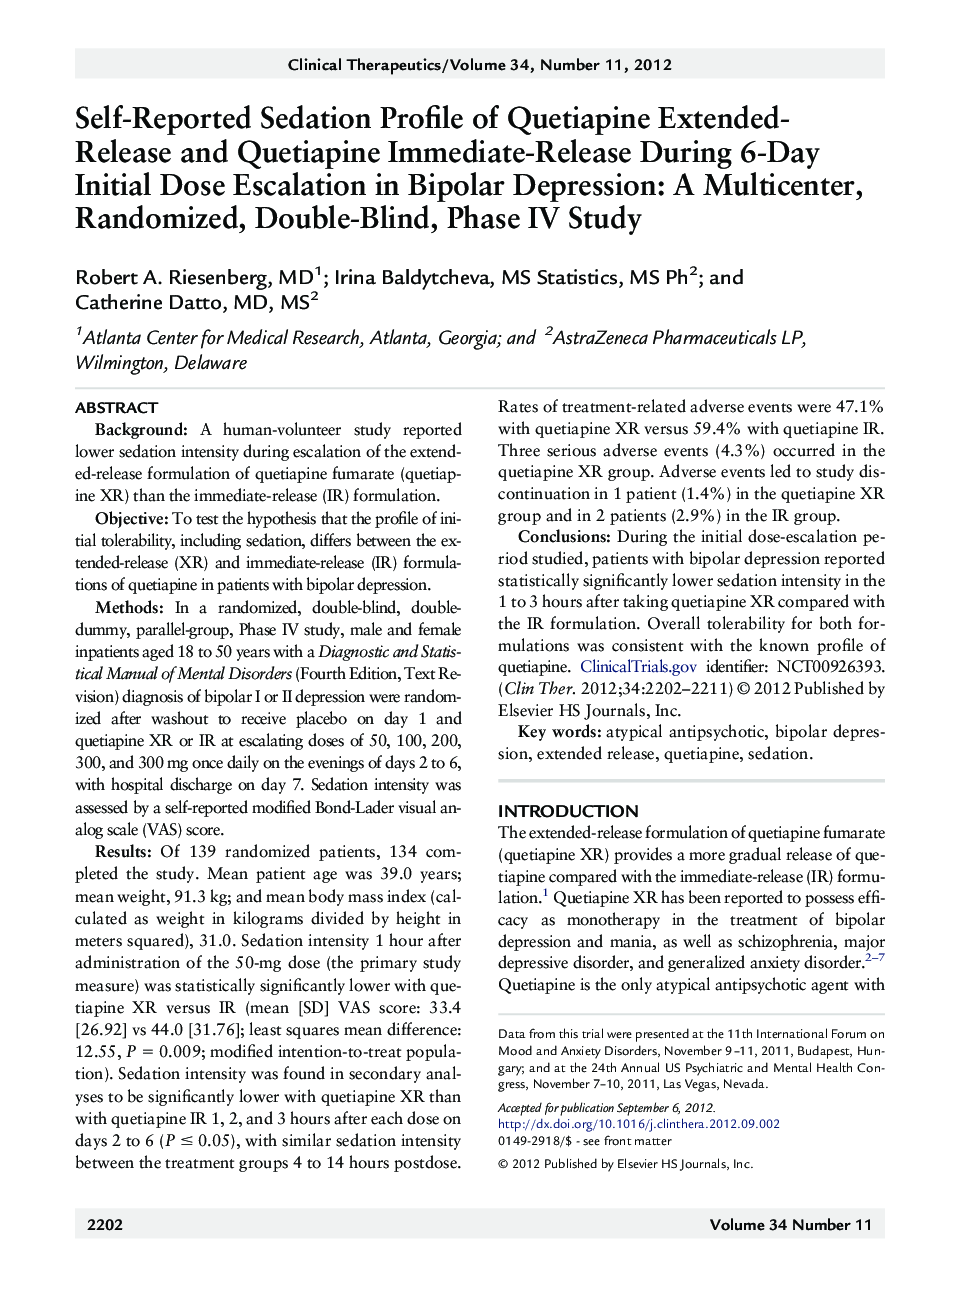 Pharmacokinetic, bioavailability, & bioequivalenceOriginal researchSelf-Reported Sedation Profile of Quetiapine Extended-Release and Quetiapine Immediate-Release During 6-Day Initial Dose Escalation in Bipolar Depression: A Multicenter, Randomized, Double